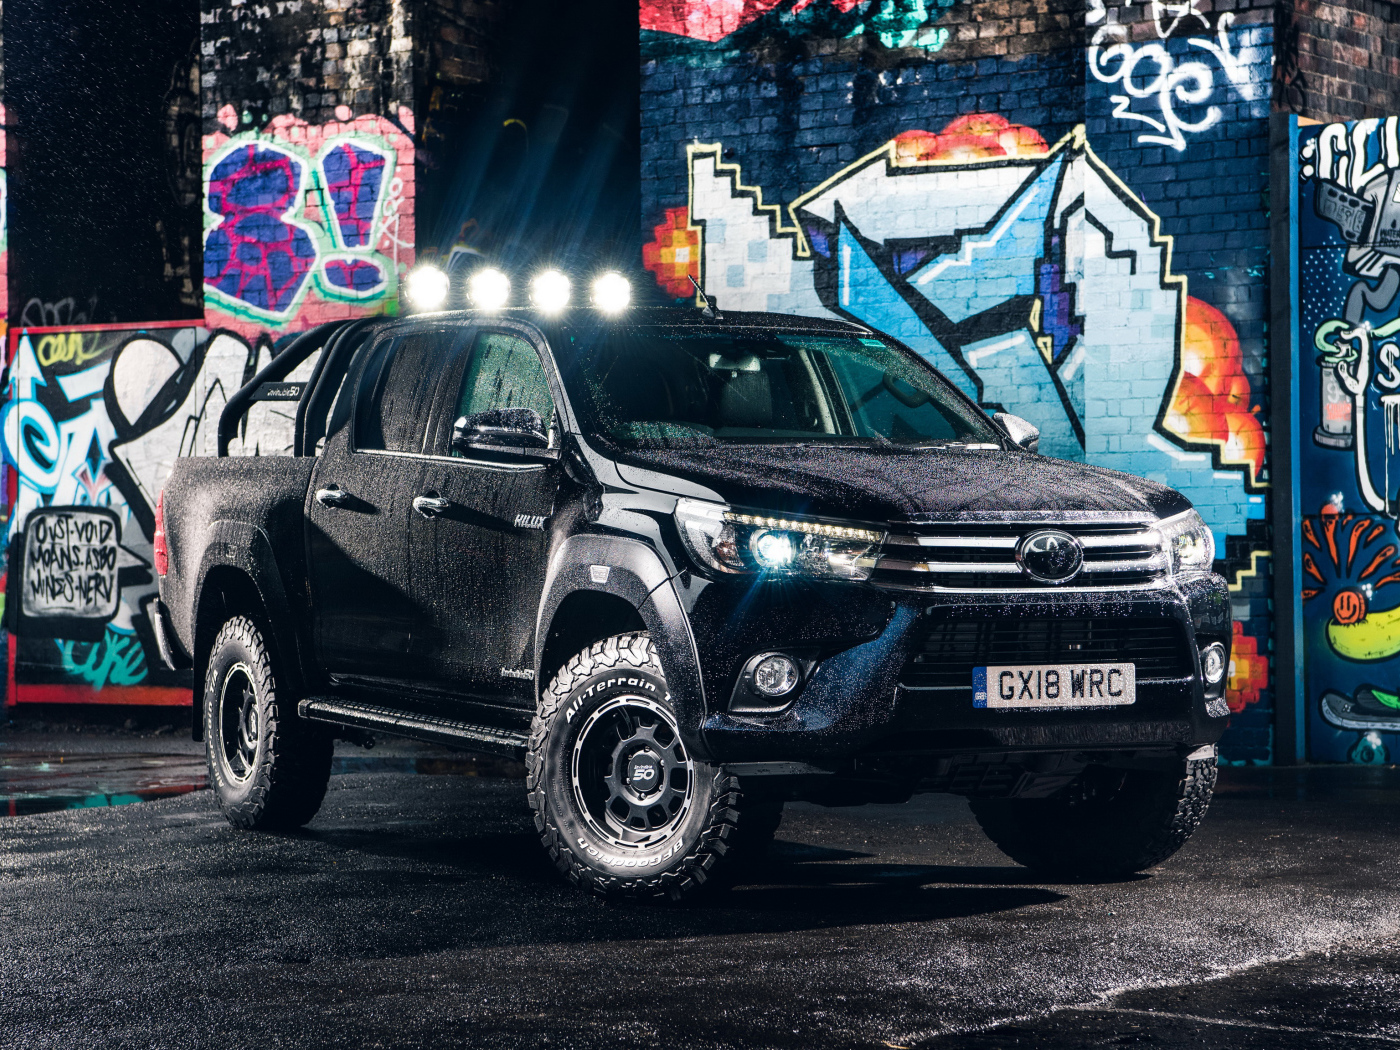 Black Toyota Hilux SUV in the rain against the backdrop of a painted wall